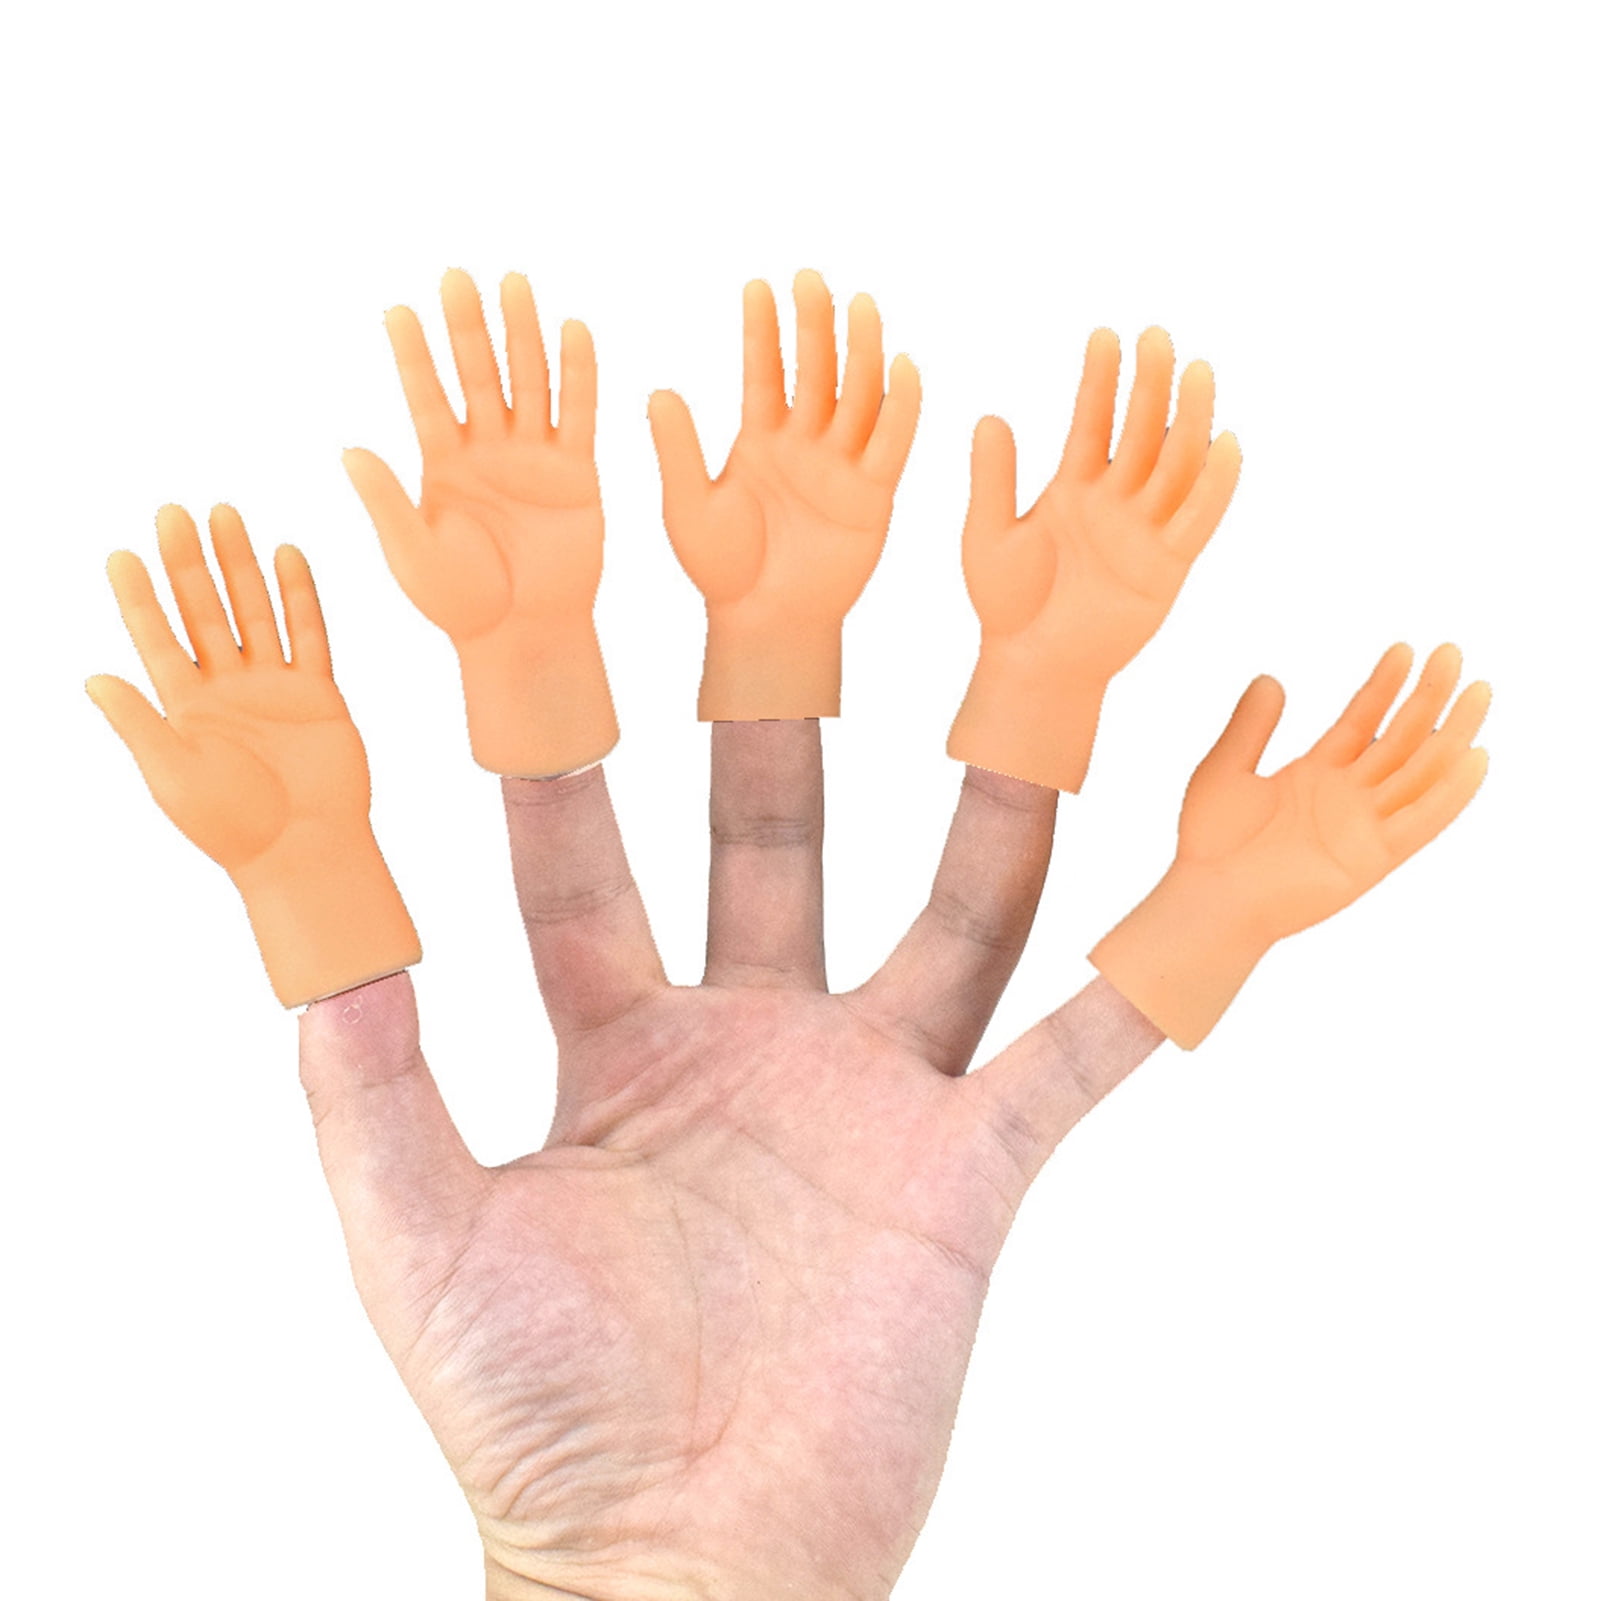  Tiny Hands 4.5-Inch Novelty Toys, Beige Left and Right Hands, Plastic Hand Puppets with Holding Sticks